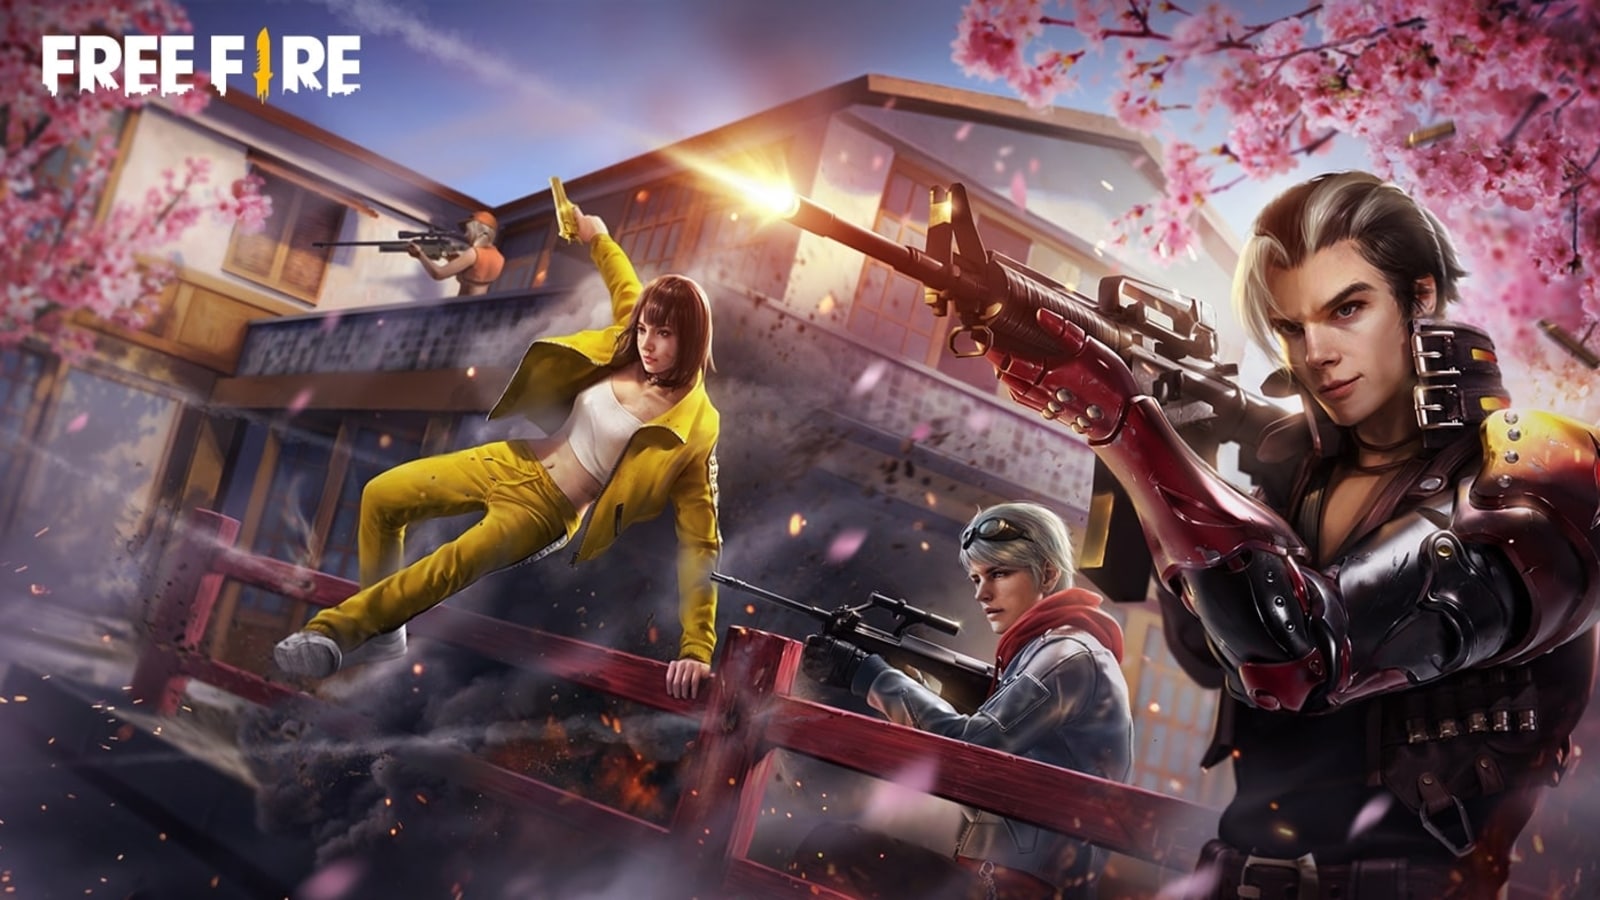 Garena Free Fire Redeem codes for January 7: The Thunder Electrified bundle  can be yours